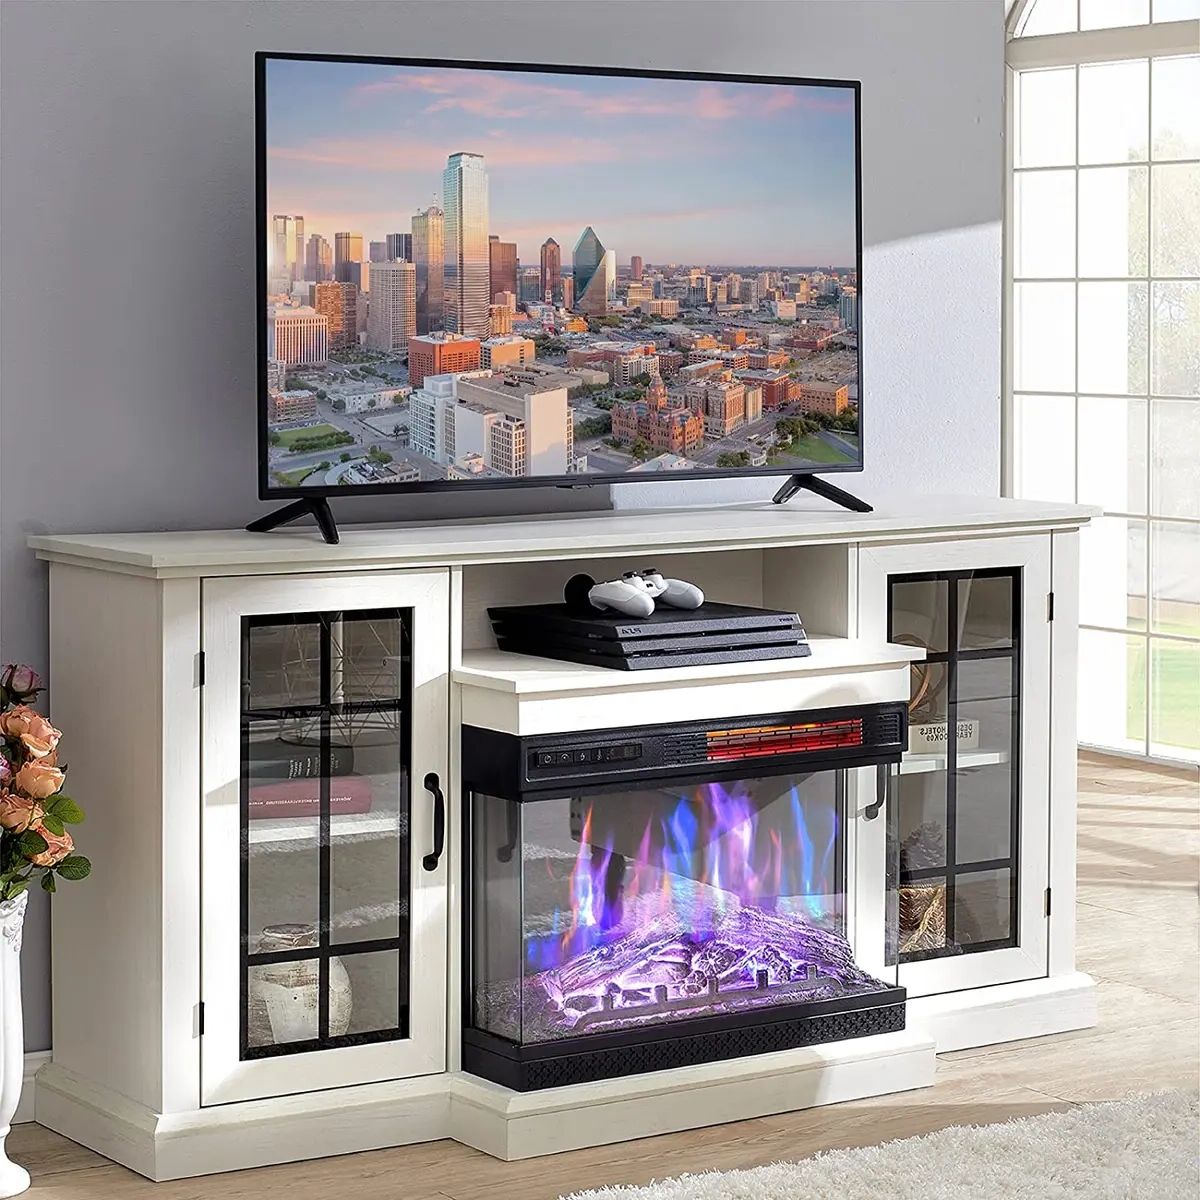 3 Sided Glass Fireplace Tv Stand For Tvs Up To 65", Glass Door, Distressed  White | Ebay Throughout Modern Fireplace Tv Stands (View 13 of 20)